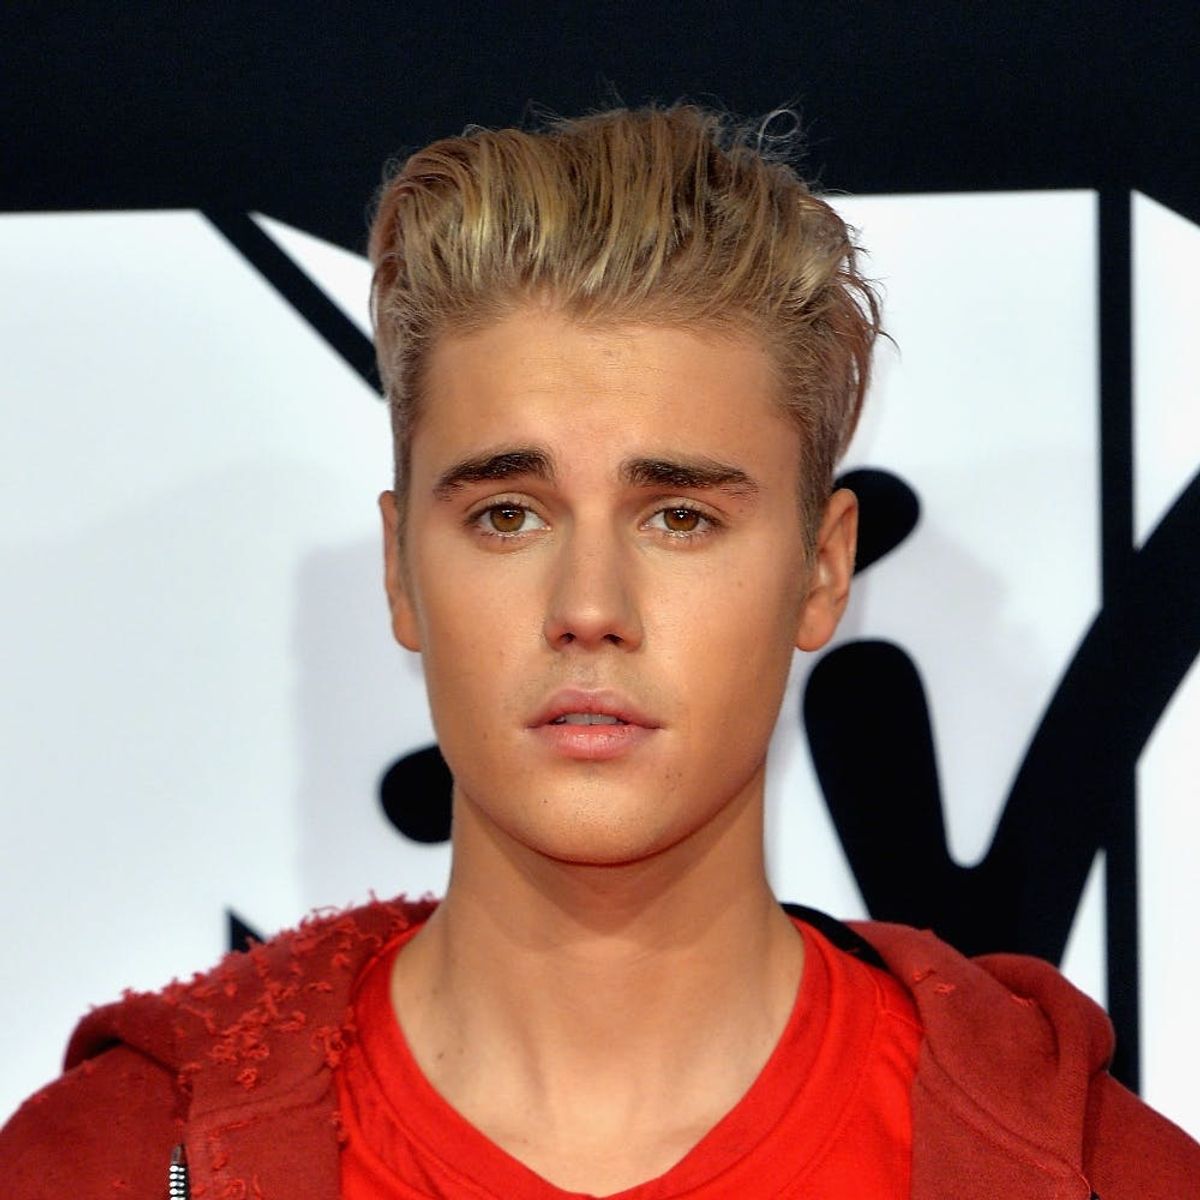 You Won’t Believe What Justin Bieber Named His Cute New Puppy